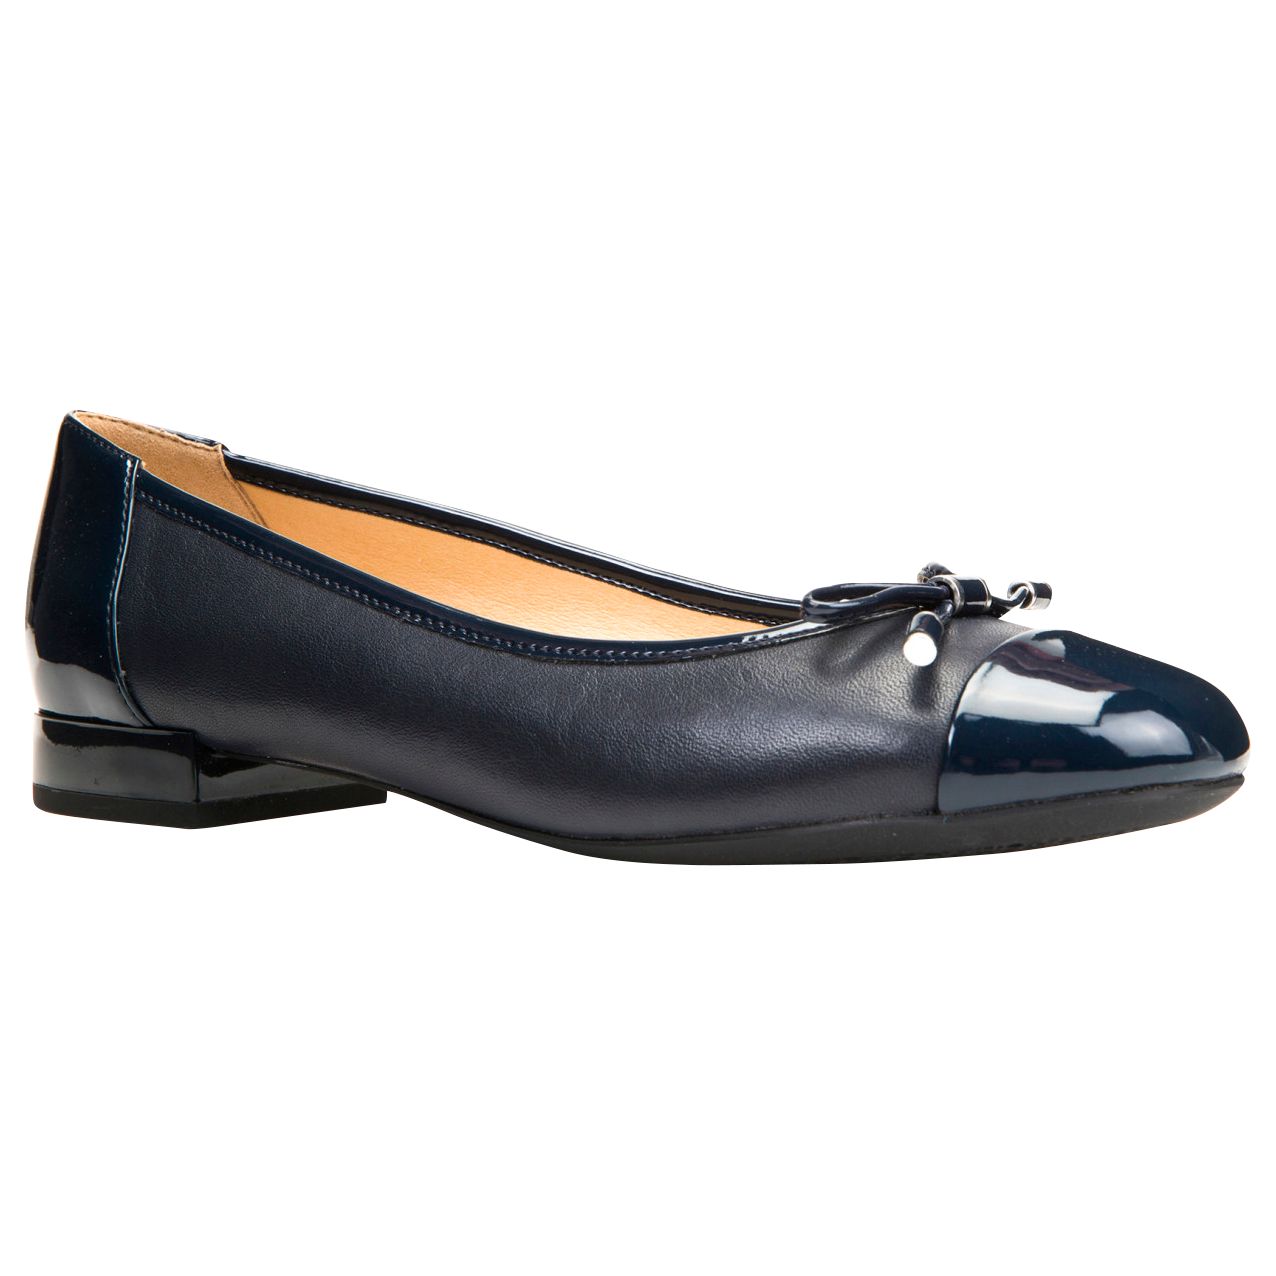 Geox Women's Wistrey Breathable Ballet Pumps, Navy Leather, 4.5